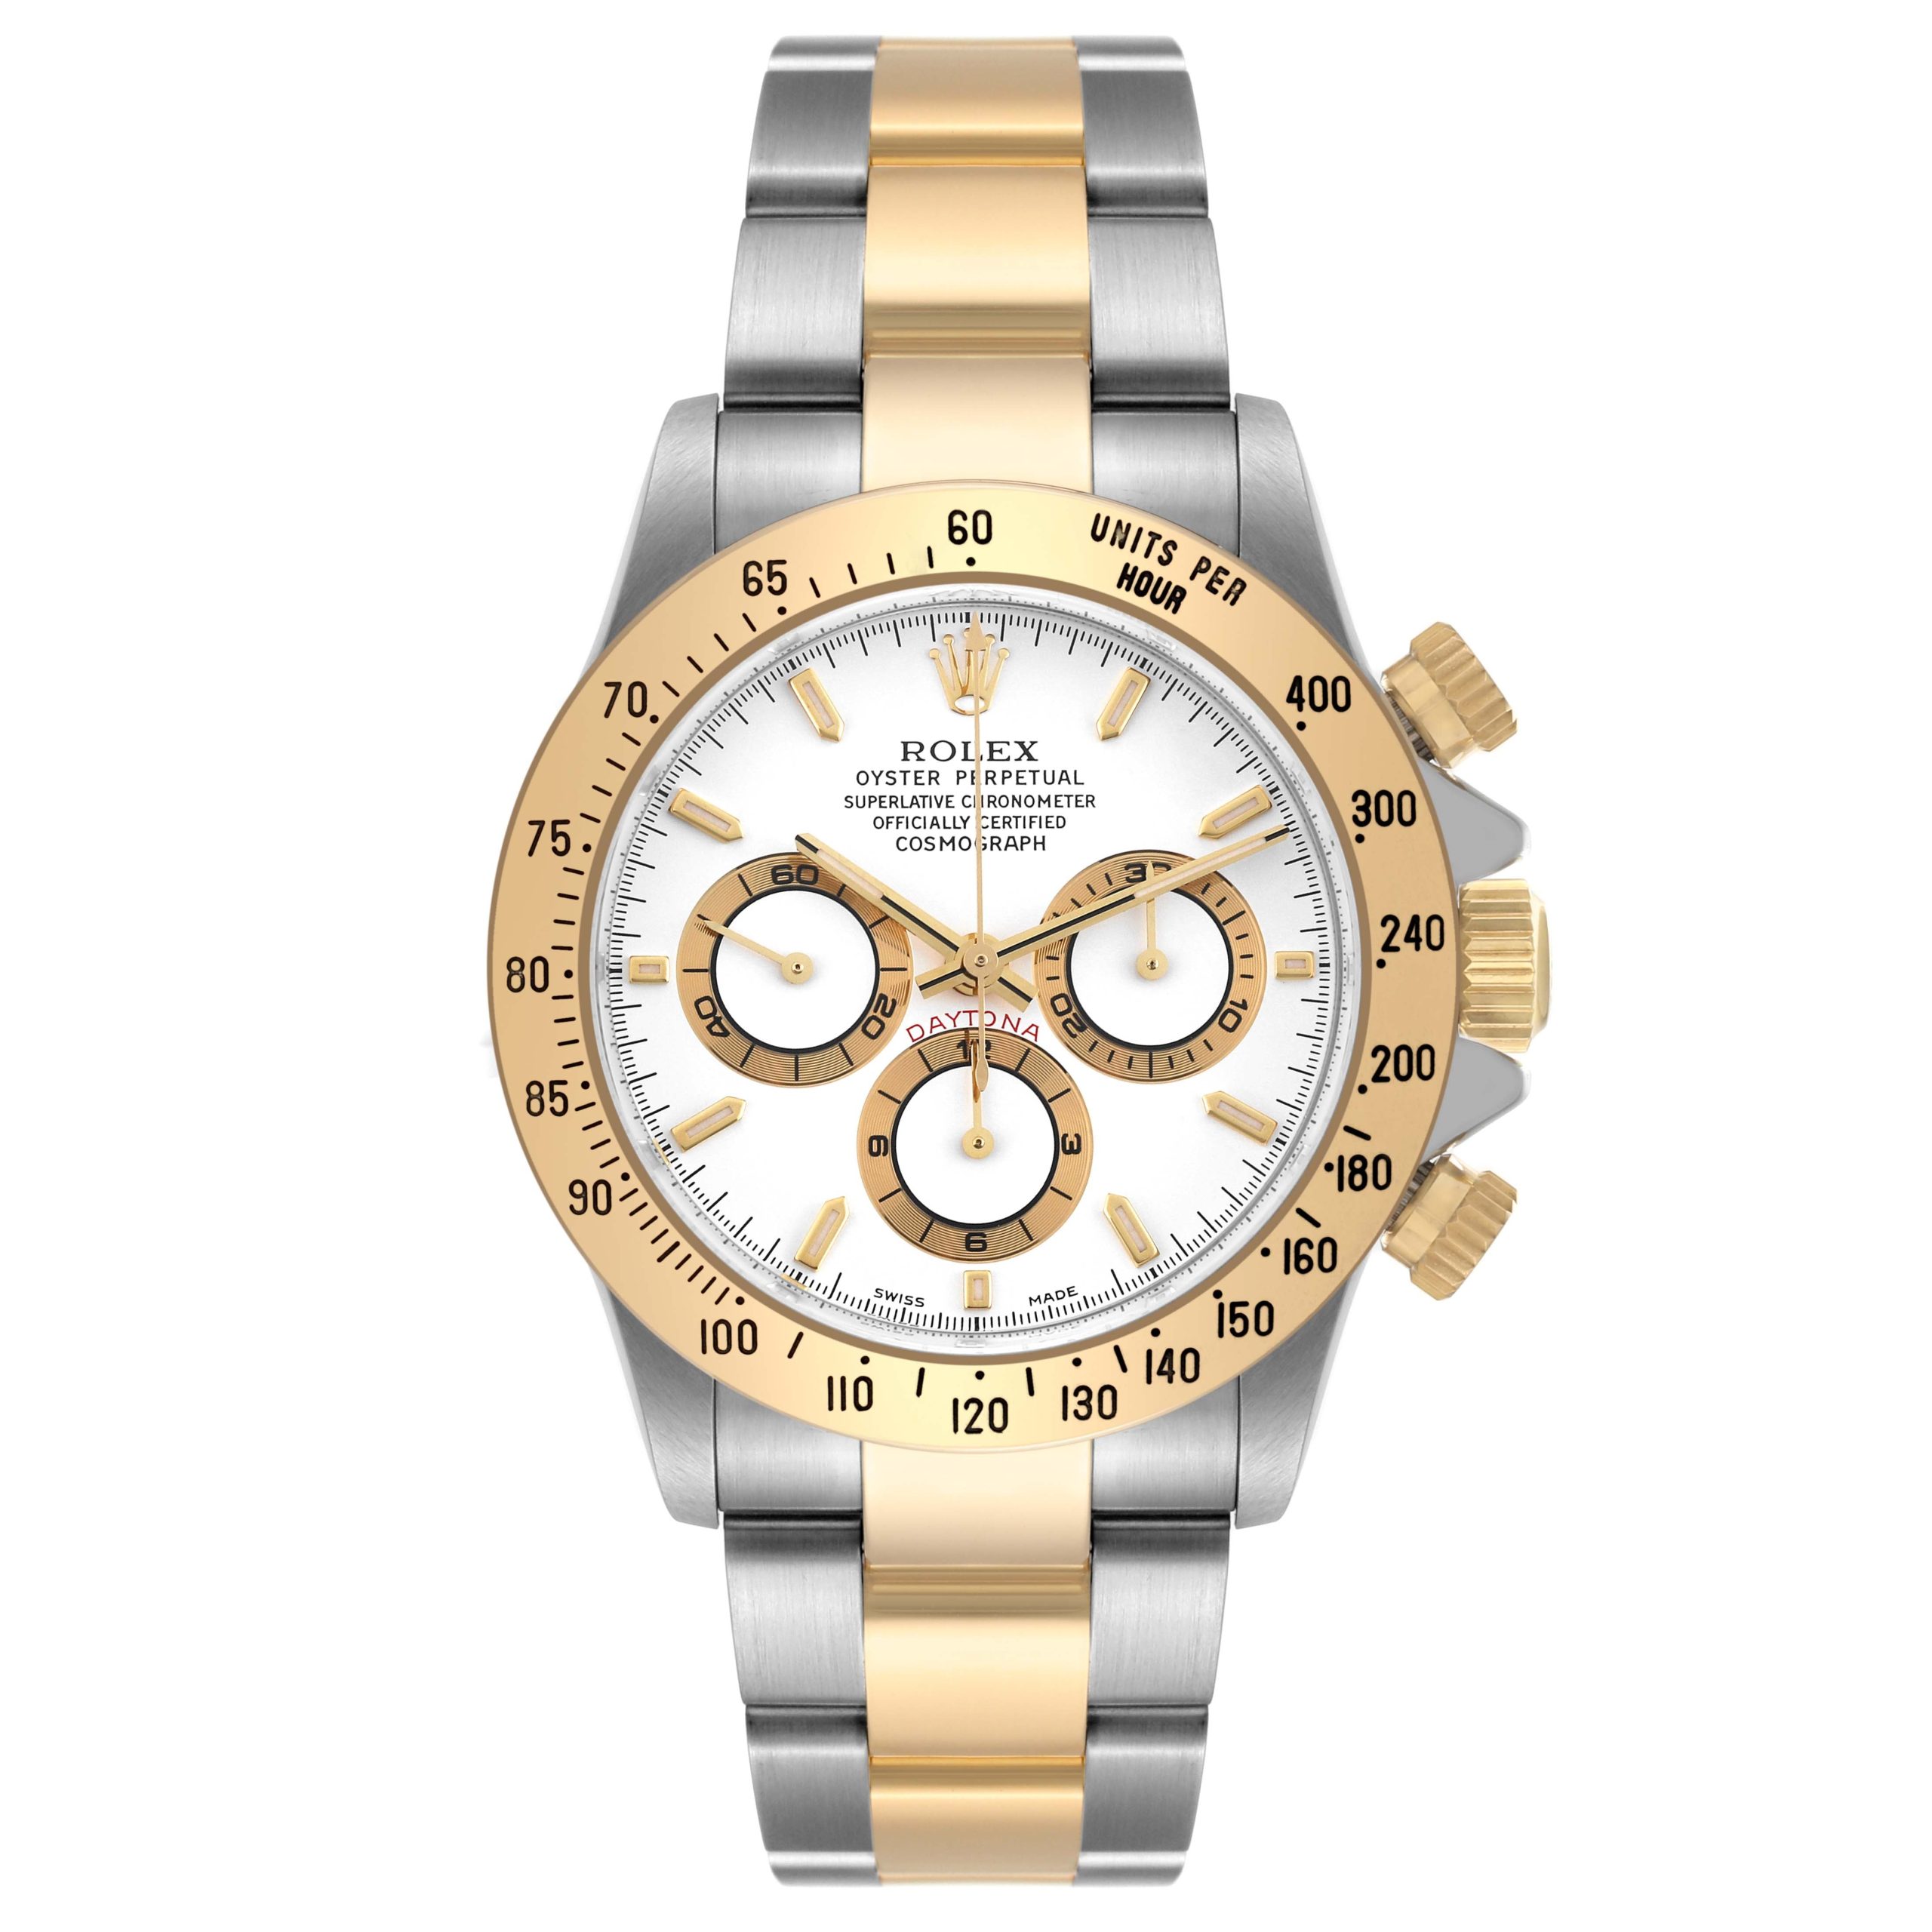 rolex daytona steel yellow gold zenith movement mens watch 16523 box papers 54445 240d1 scaled